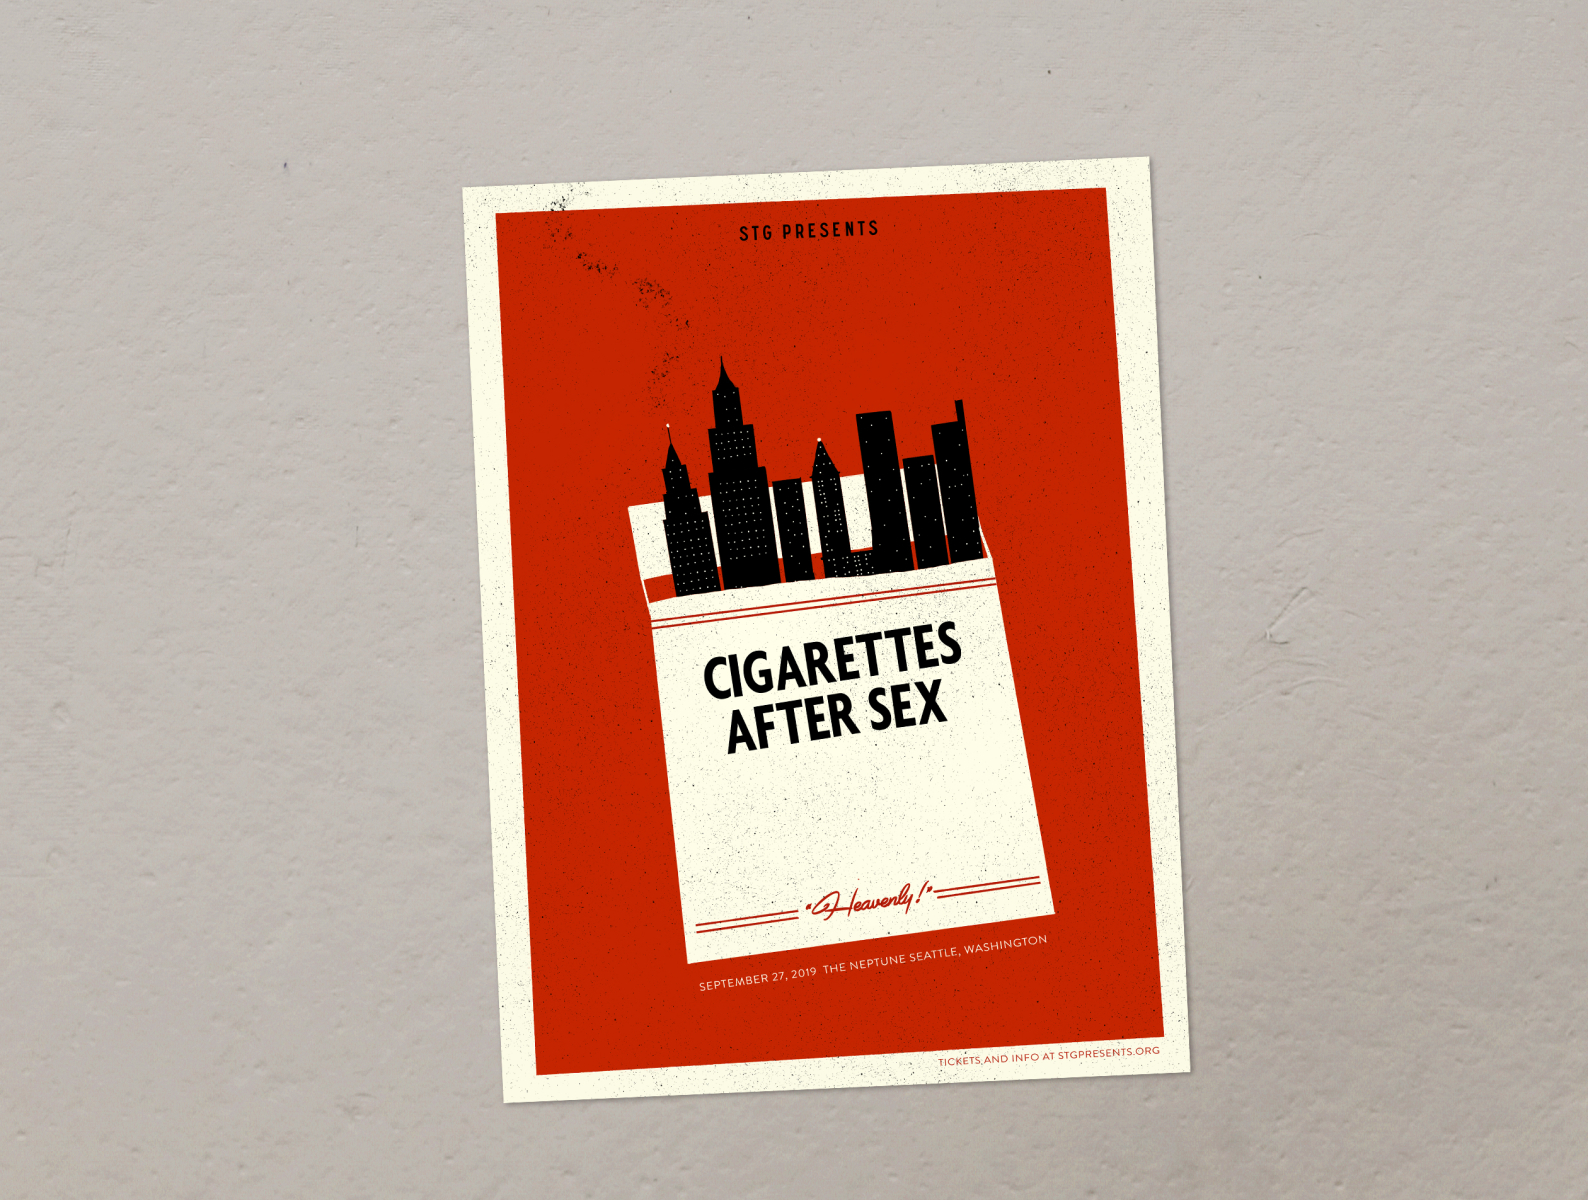 Cigarettes After Sex Poster buildings illustration mid-century midcentury neptune theater neptune theater seattle smith tower stg